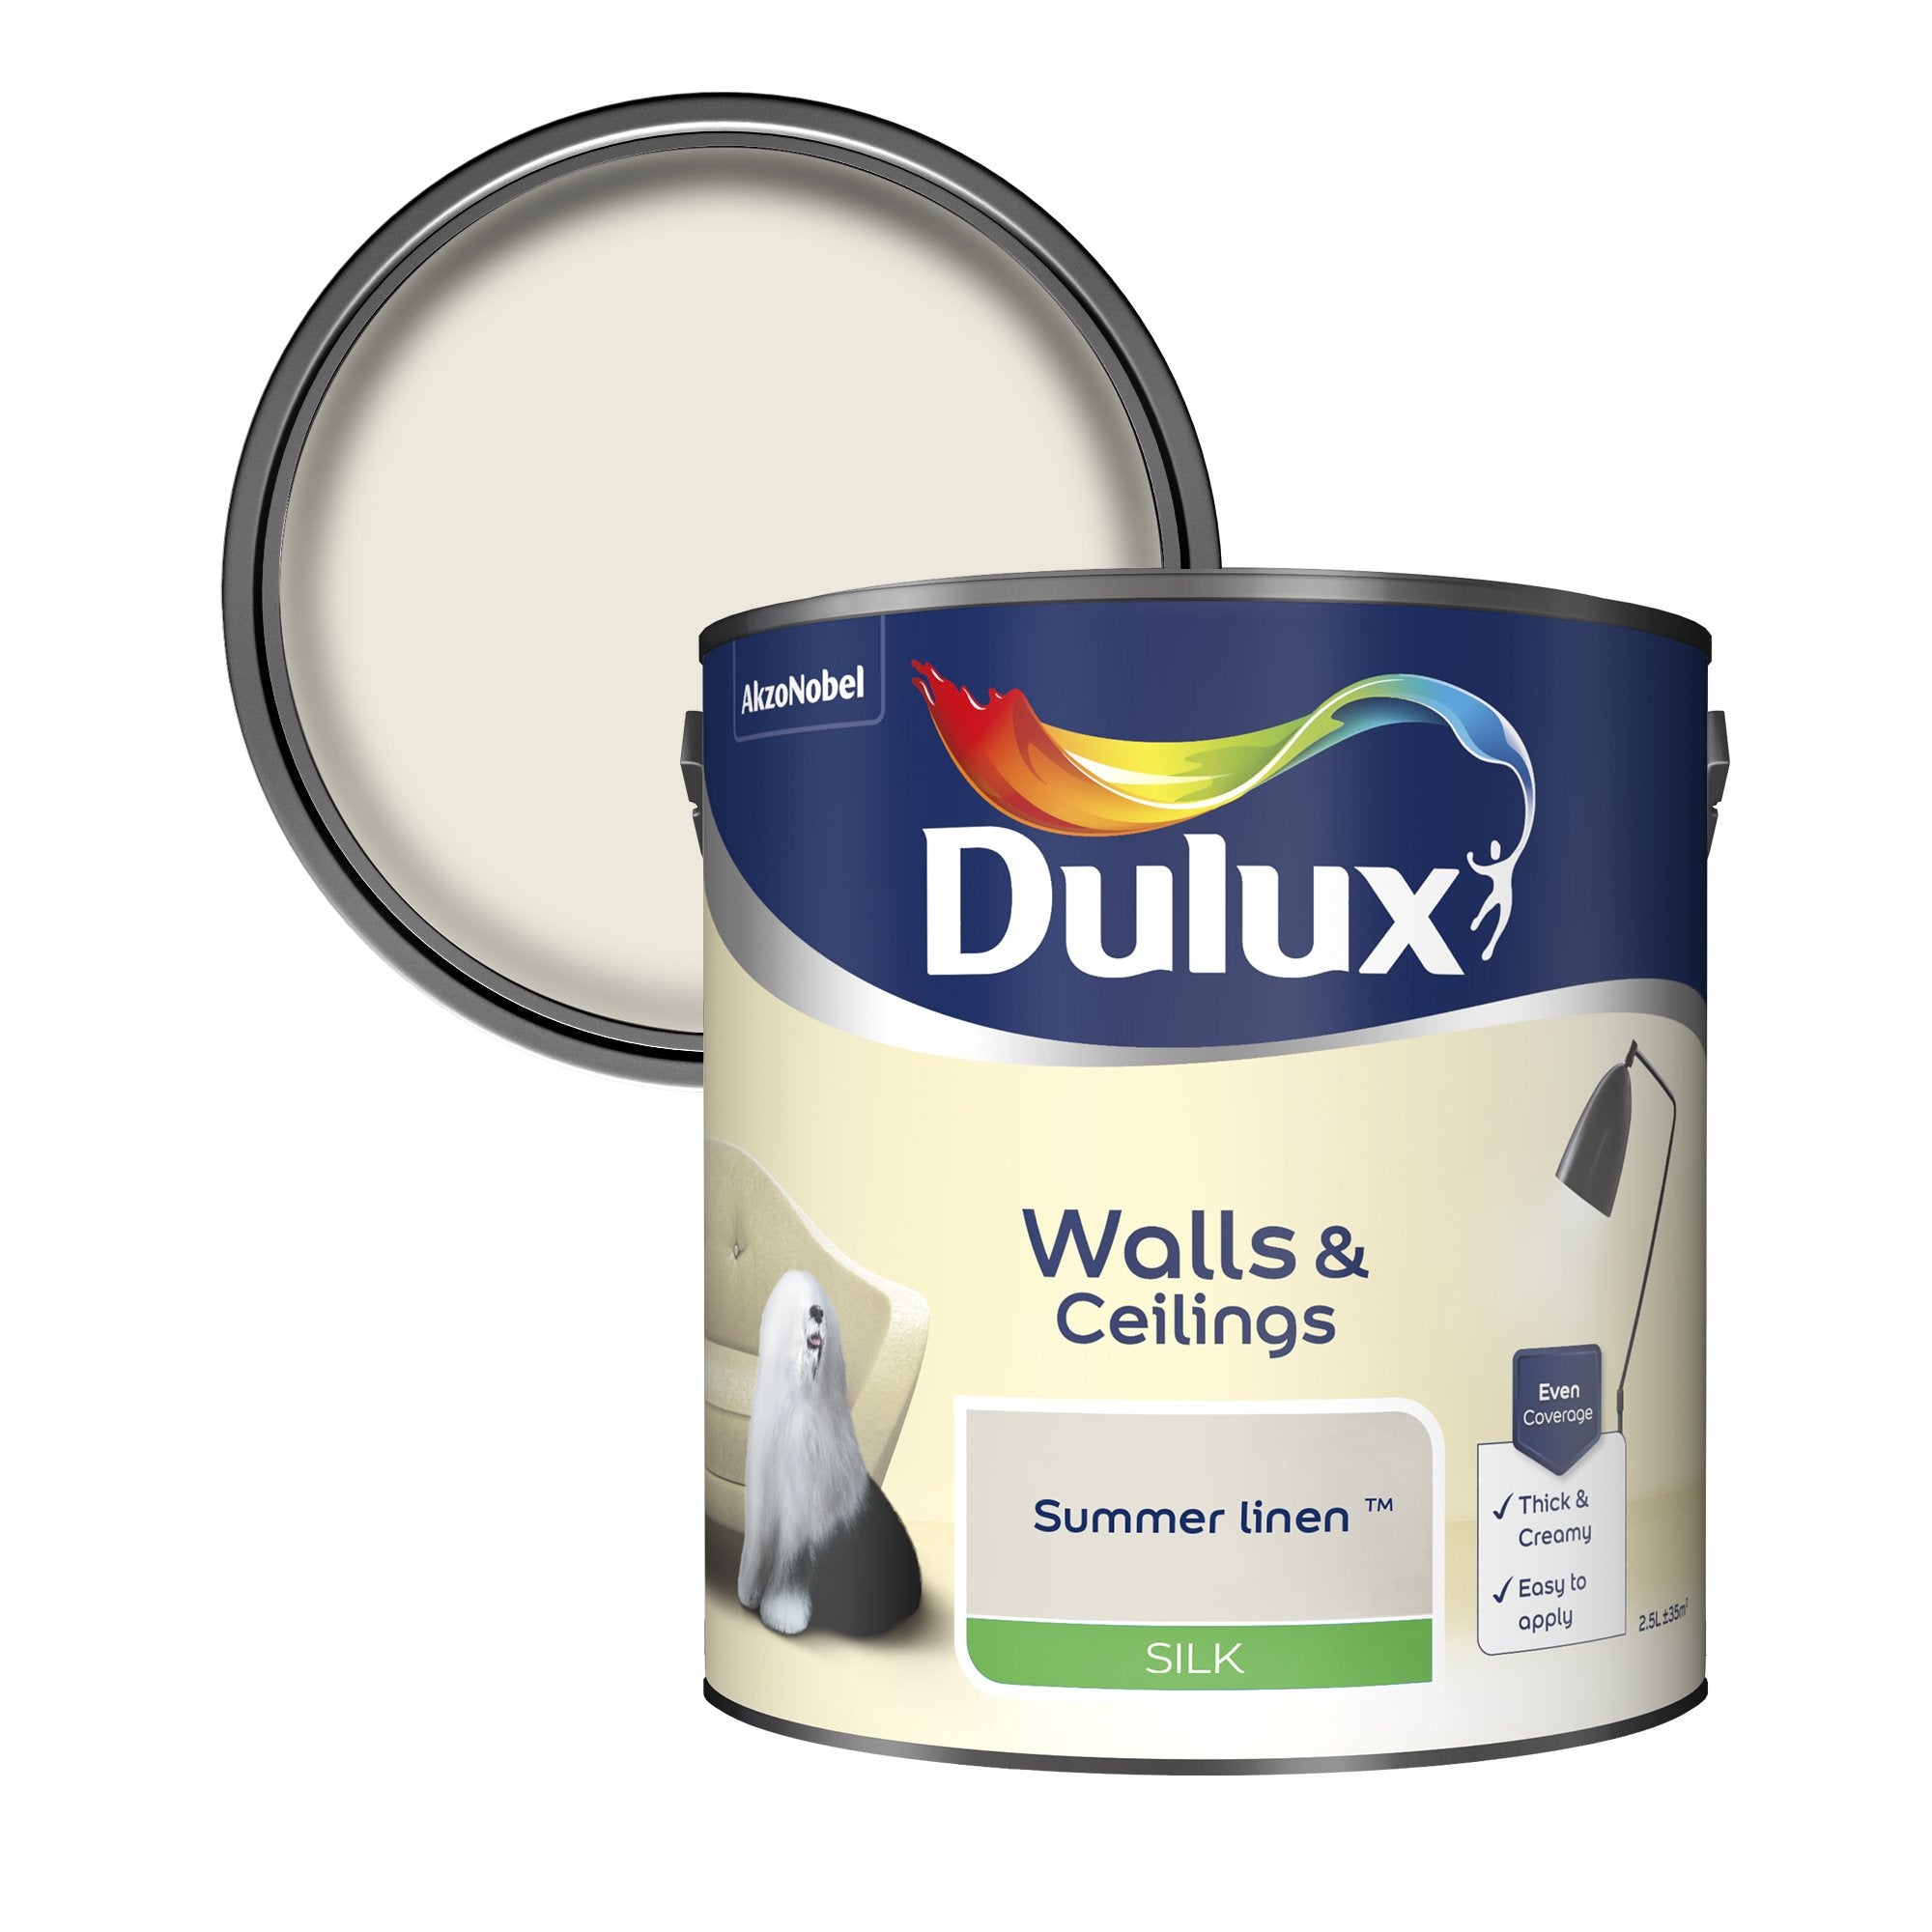 Dulux-Silk-Emulsion-Paint For-Walls-And-Ceilings-Summer-Linen-2.5L